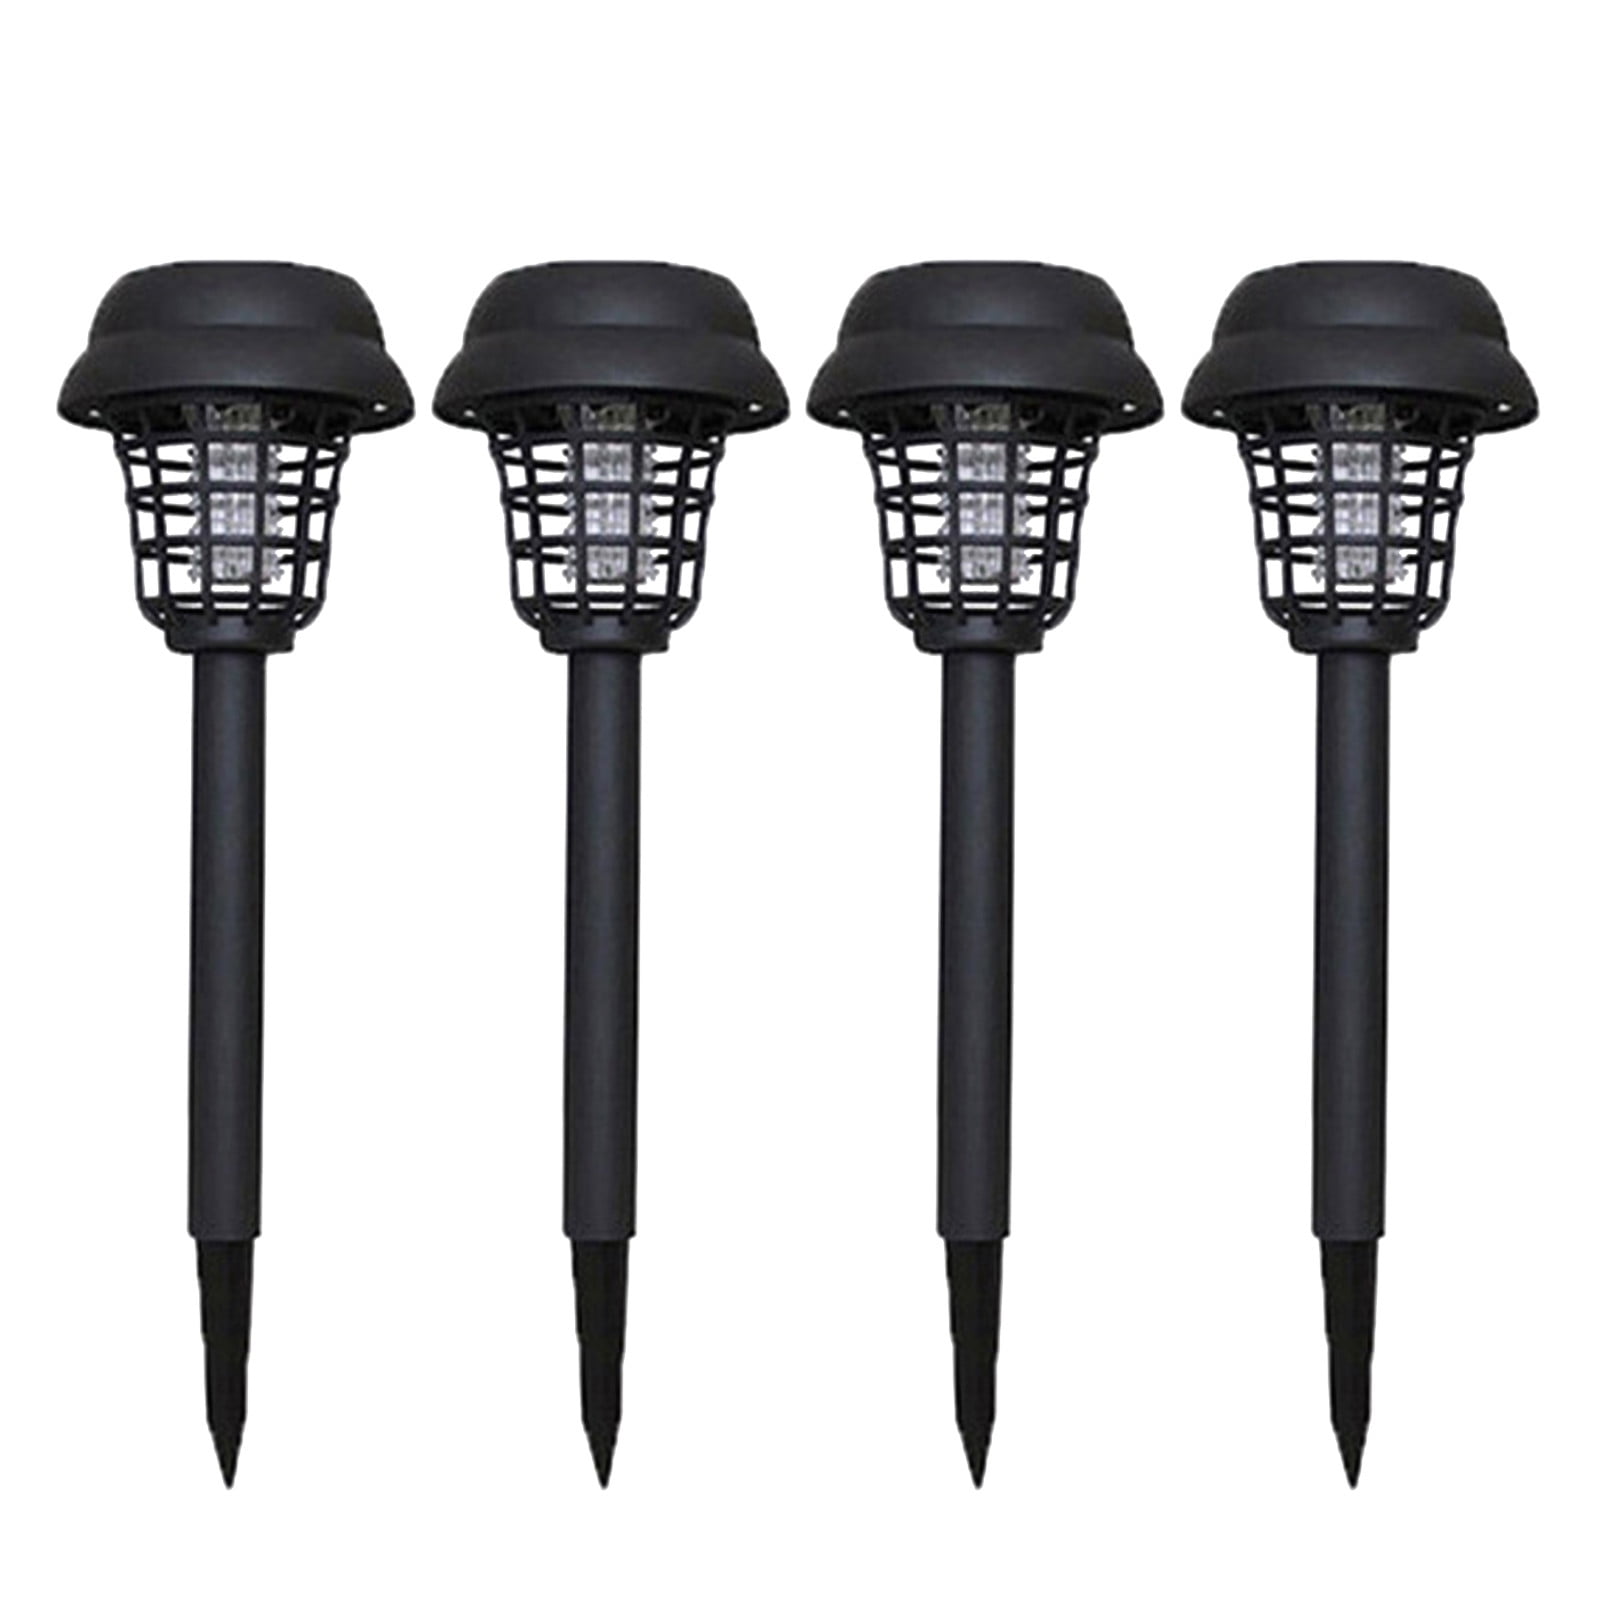 4PC Solar Powered LED Light Pest Bug Zapper Insect Mosquito Lamp Garden Wall 